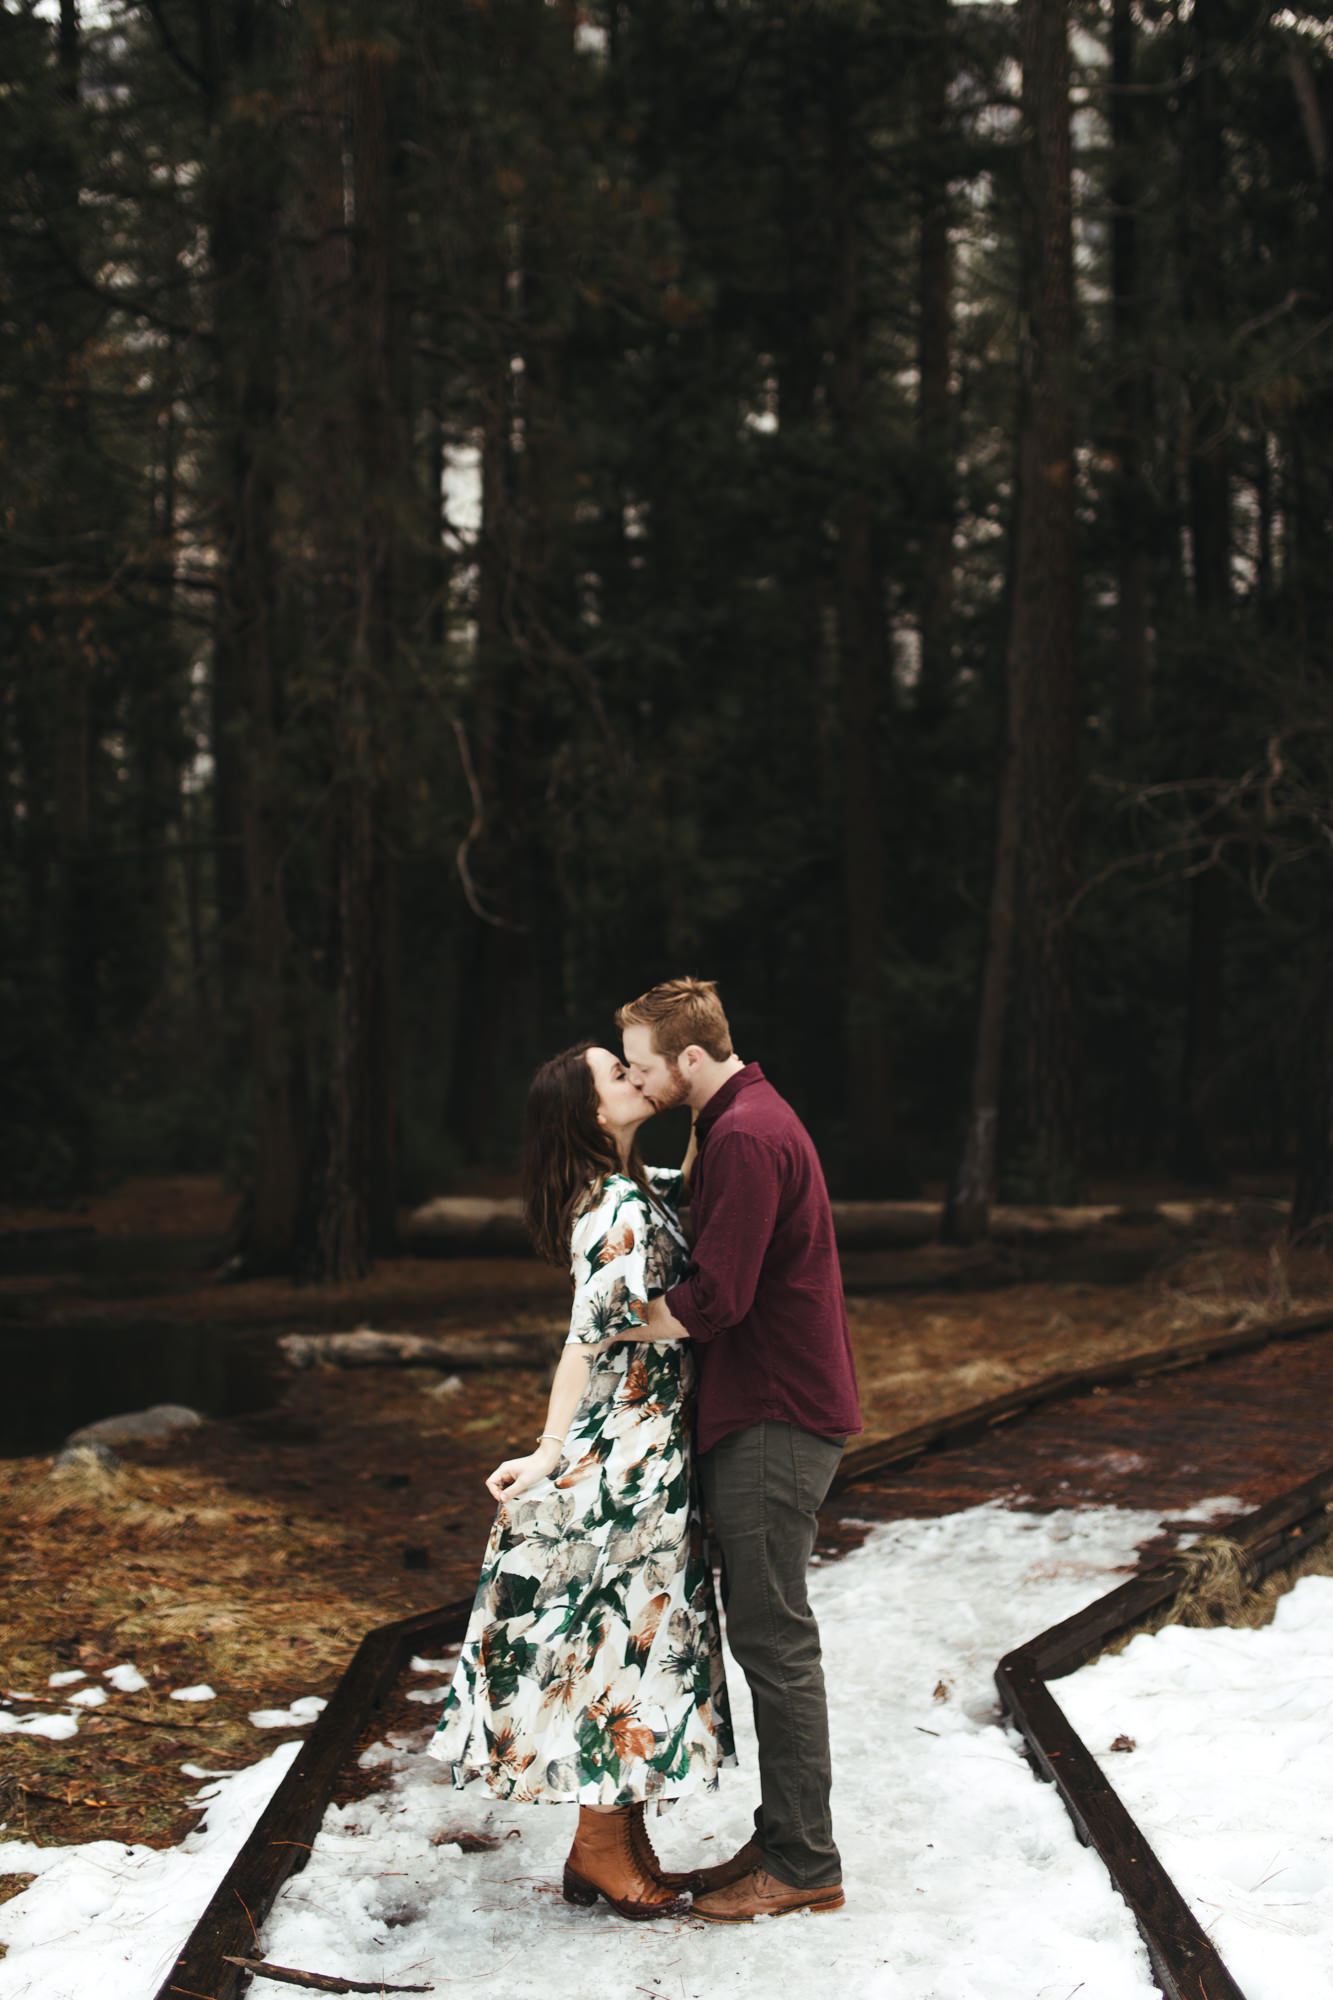 adventure engagement photo session in yosemite national park // california wedding and elopement photographer // www.abbihearne.com